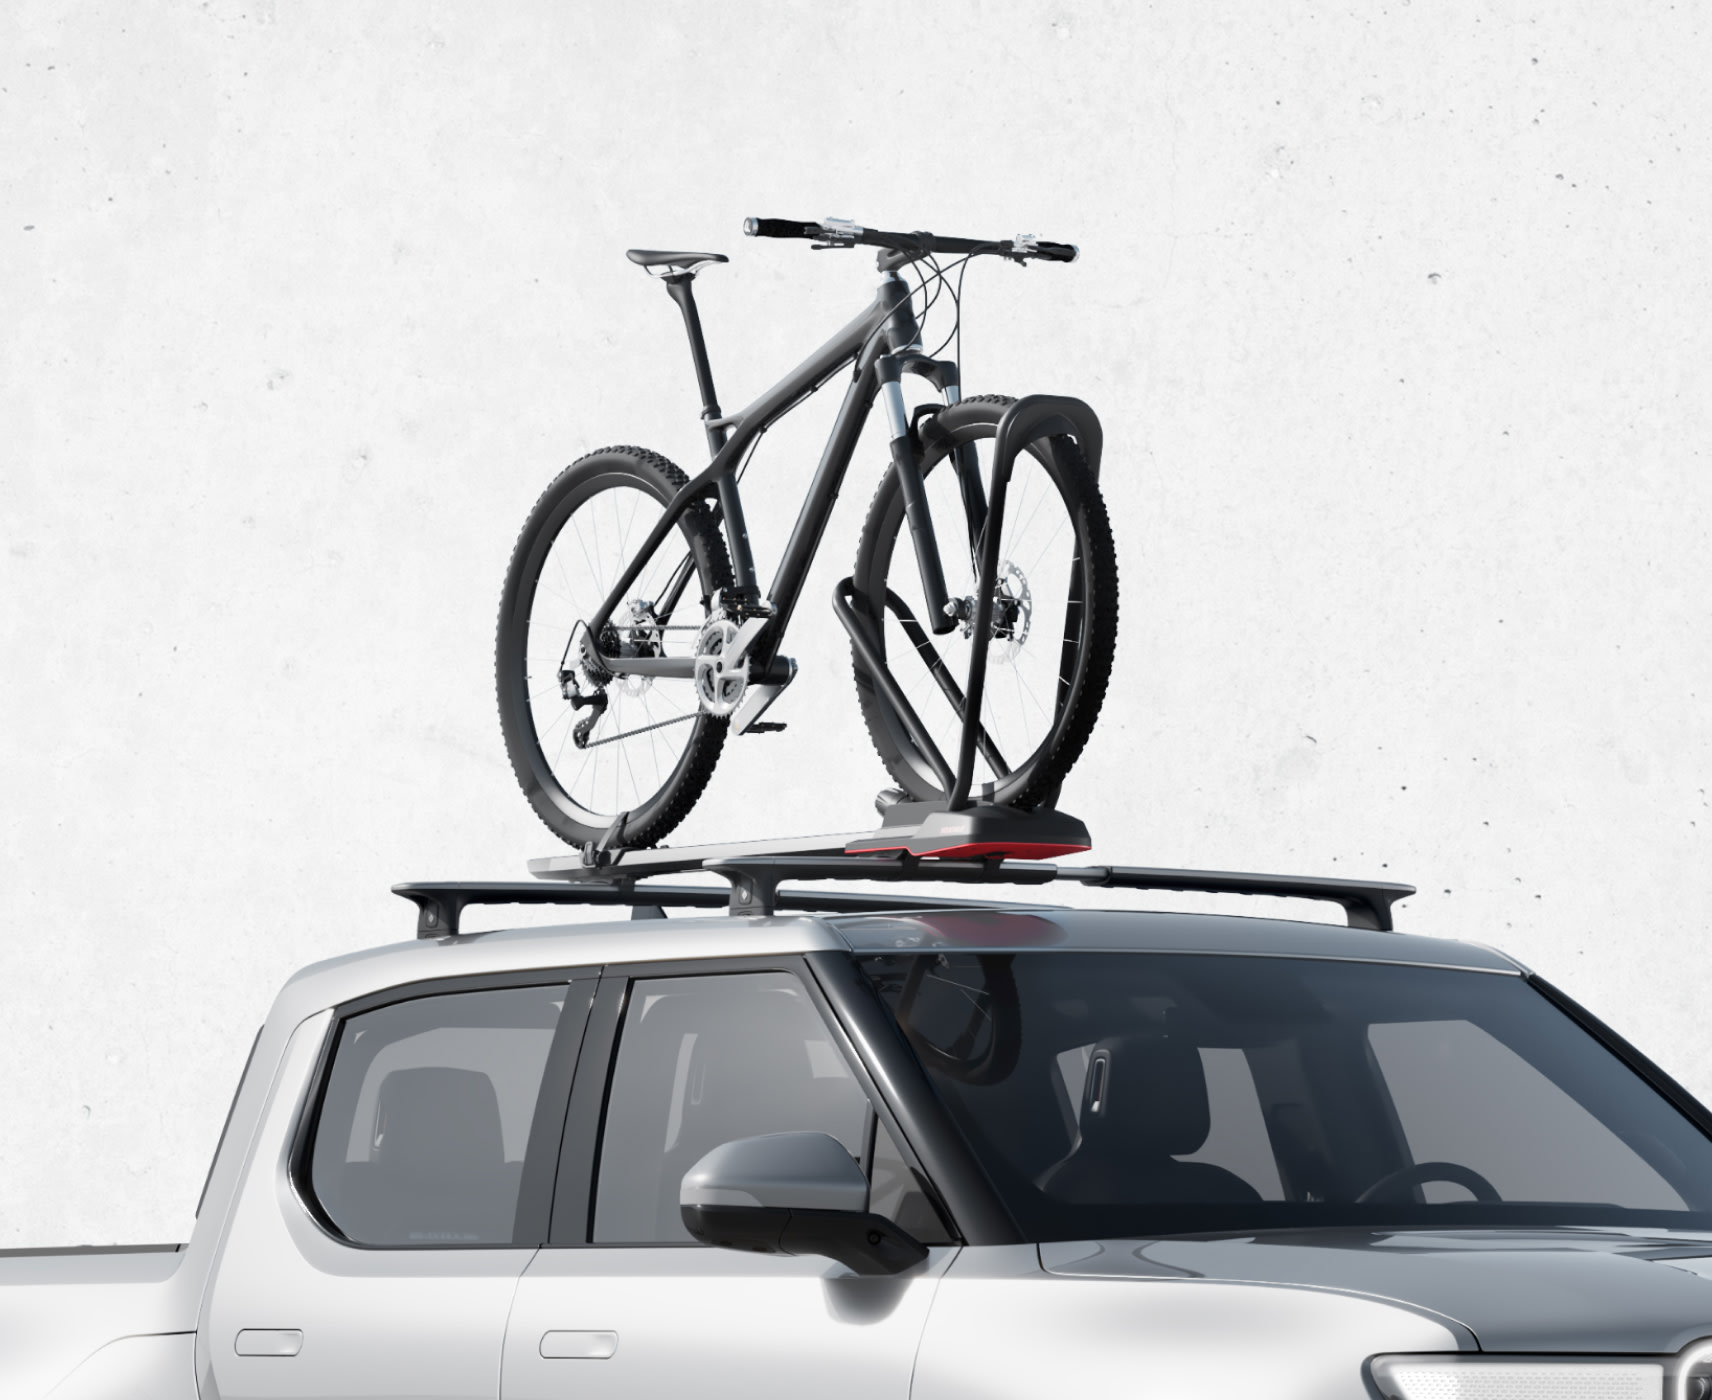 Finding the Right Rooftop Bike Mount to Fit On Racks Across the Bed